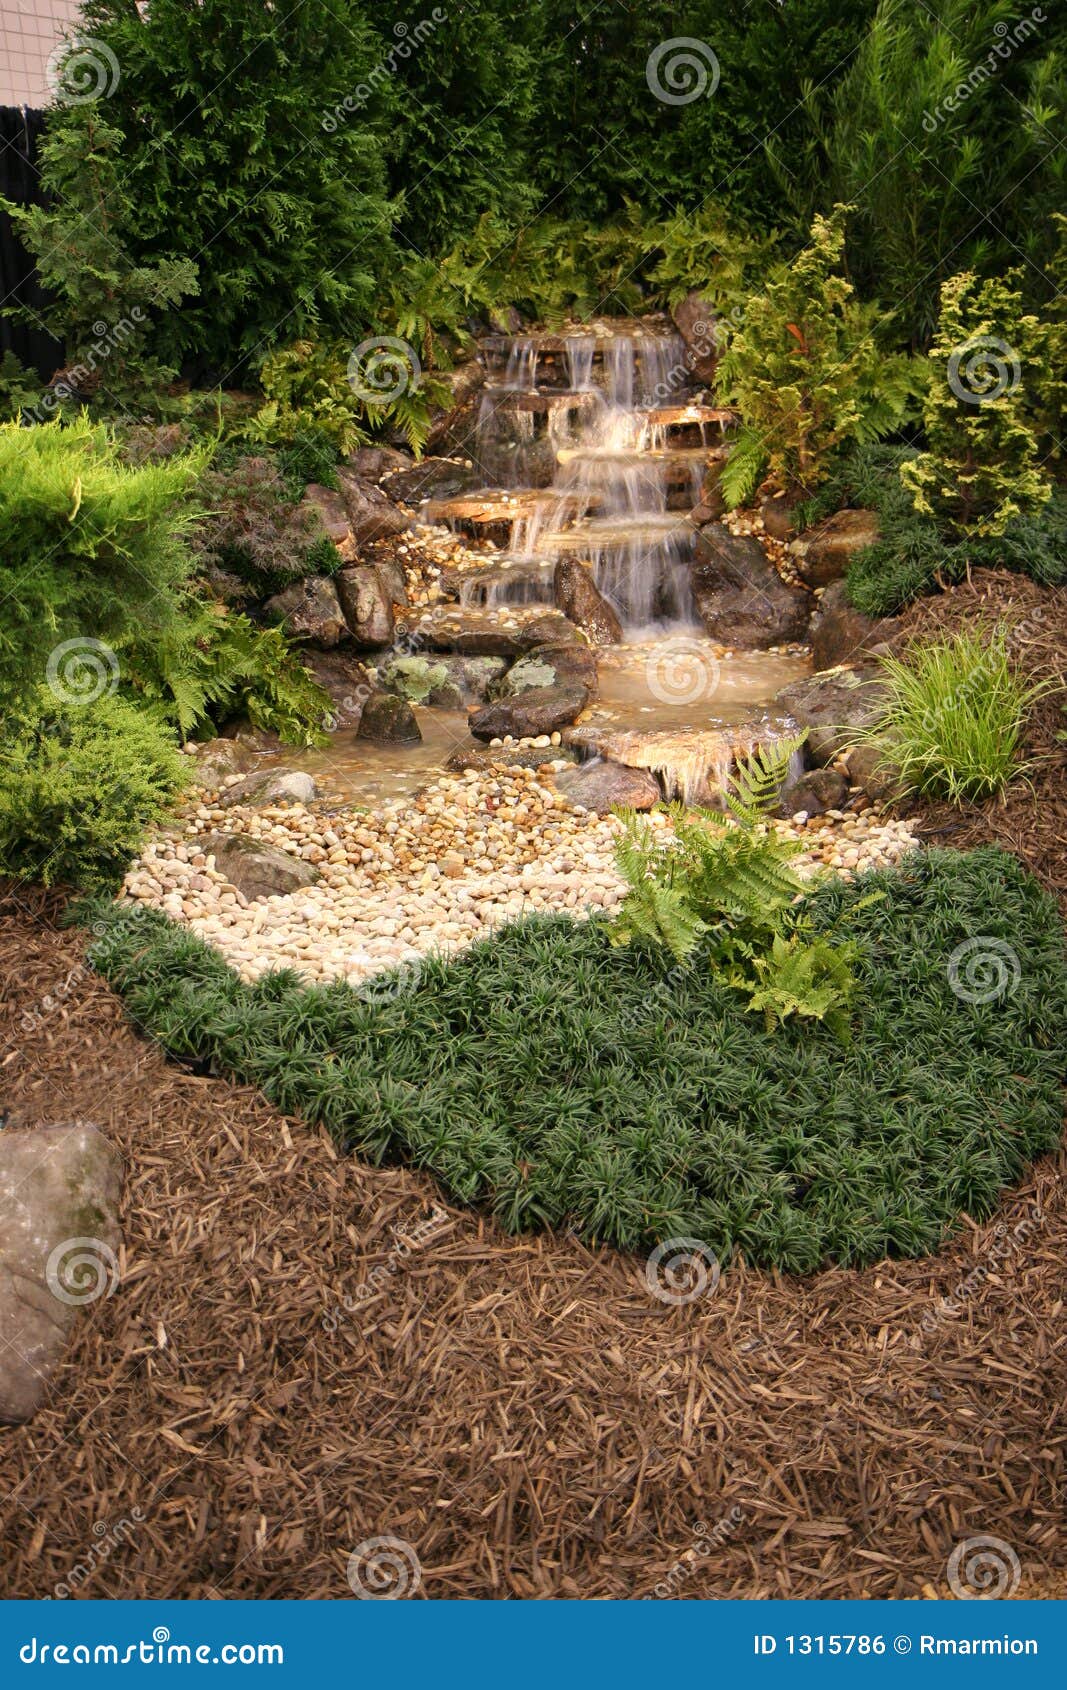 home water feature